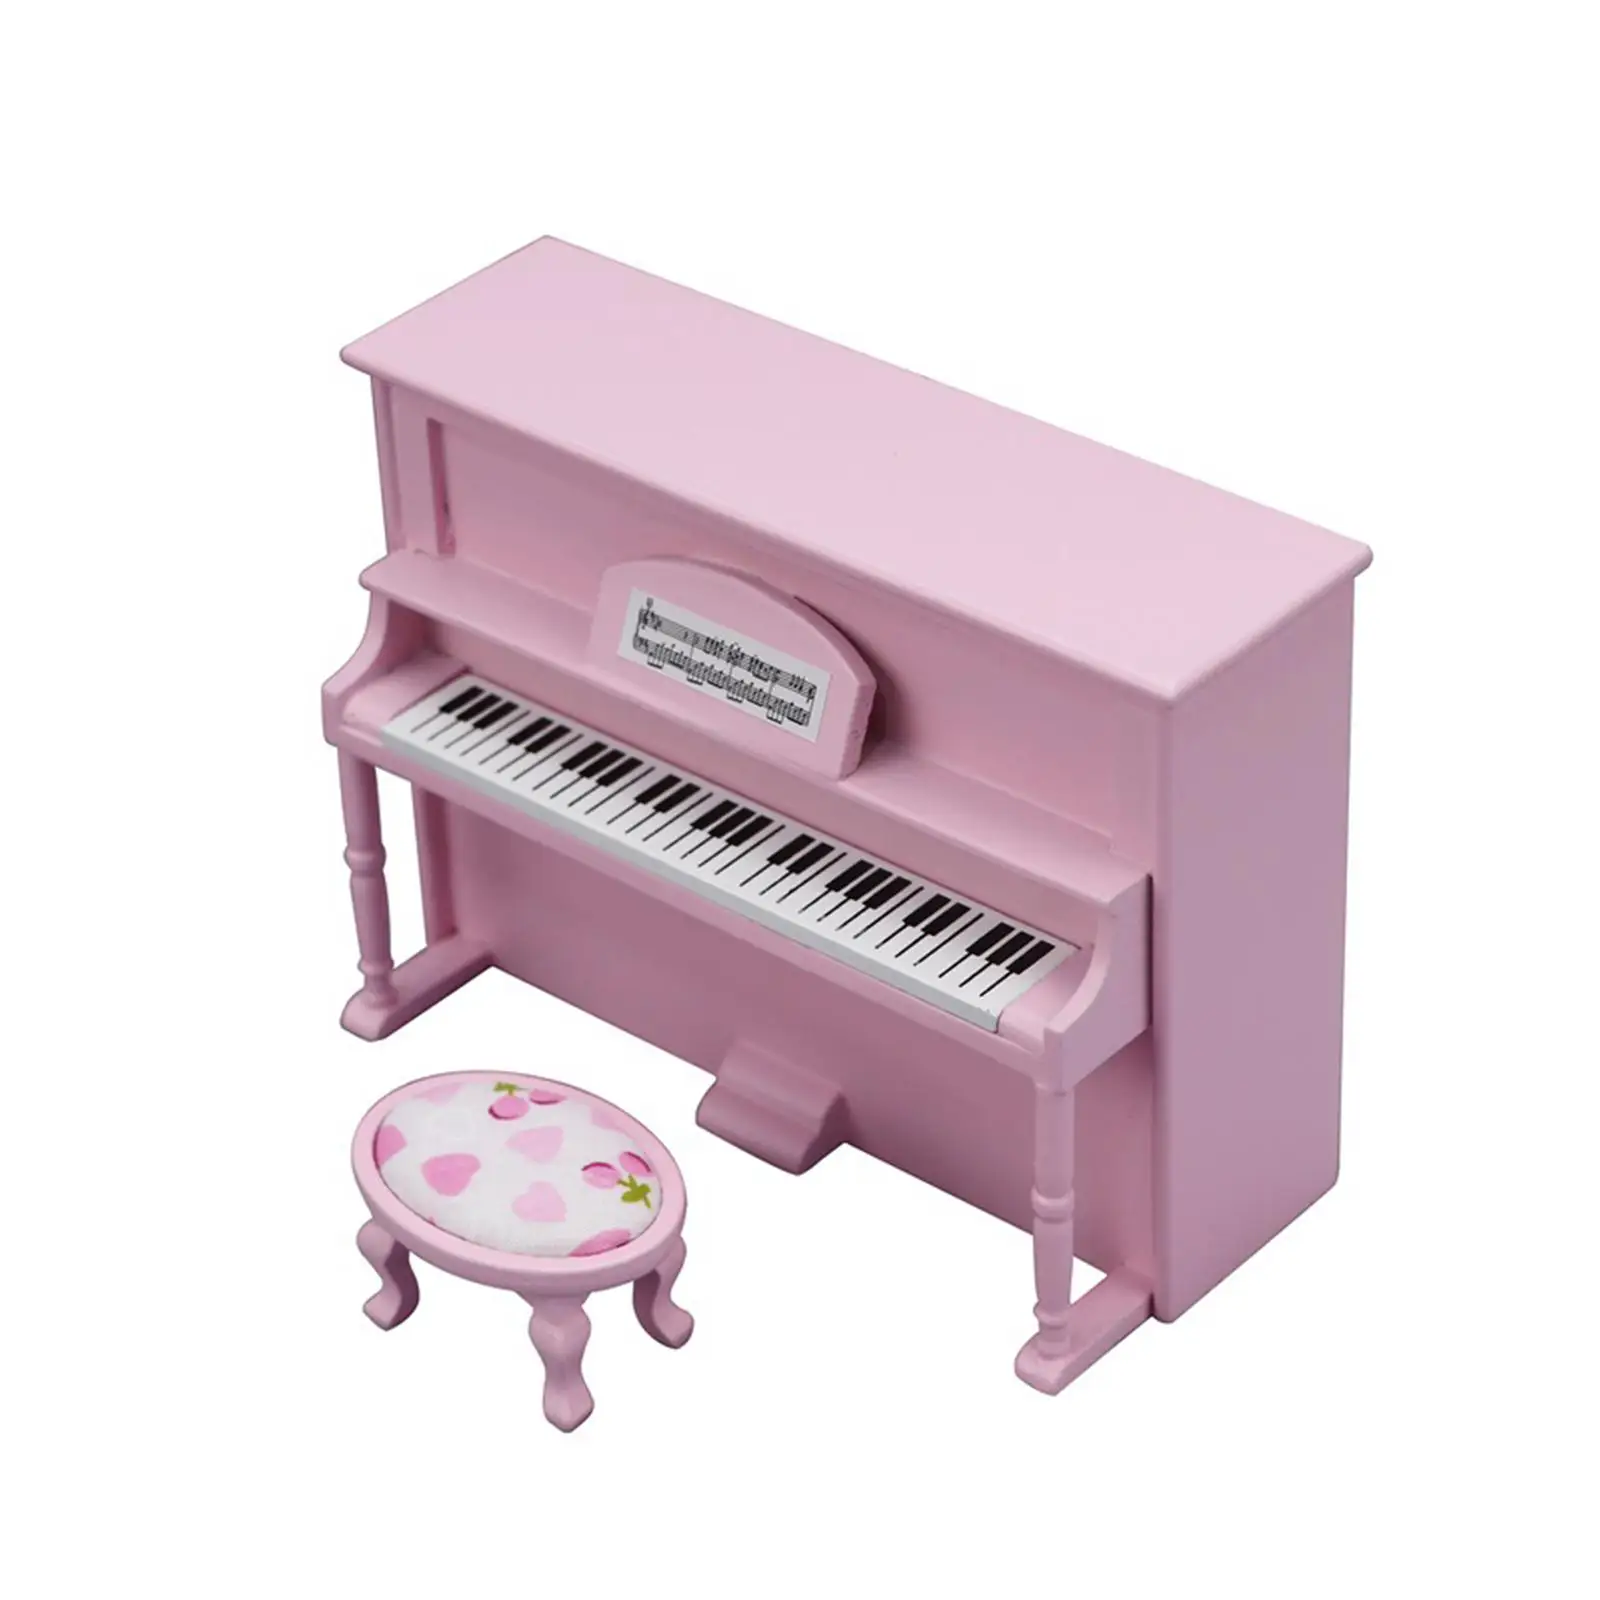 Miniature Piano Model with Stool Accessories Toys Doll House Furniture Living Room Elegant Piano Decoration Ornaments